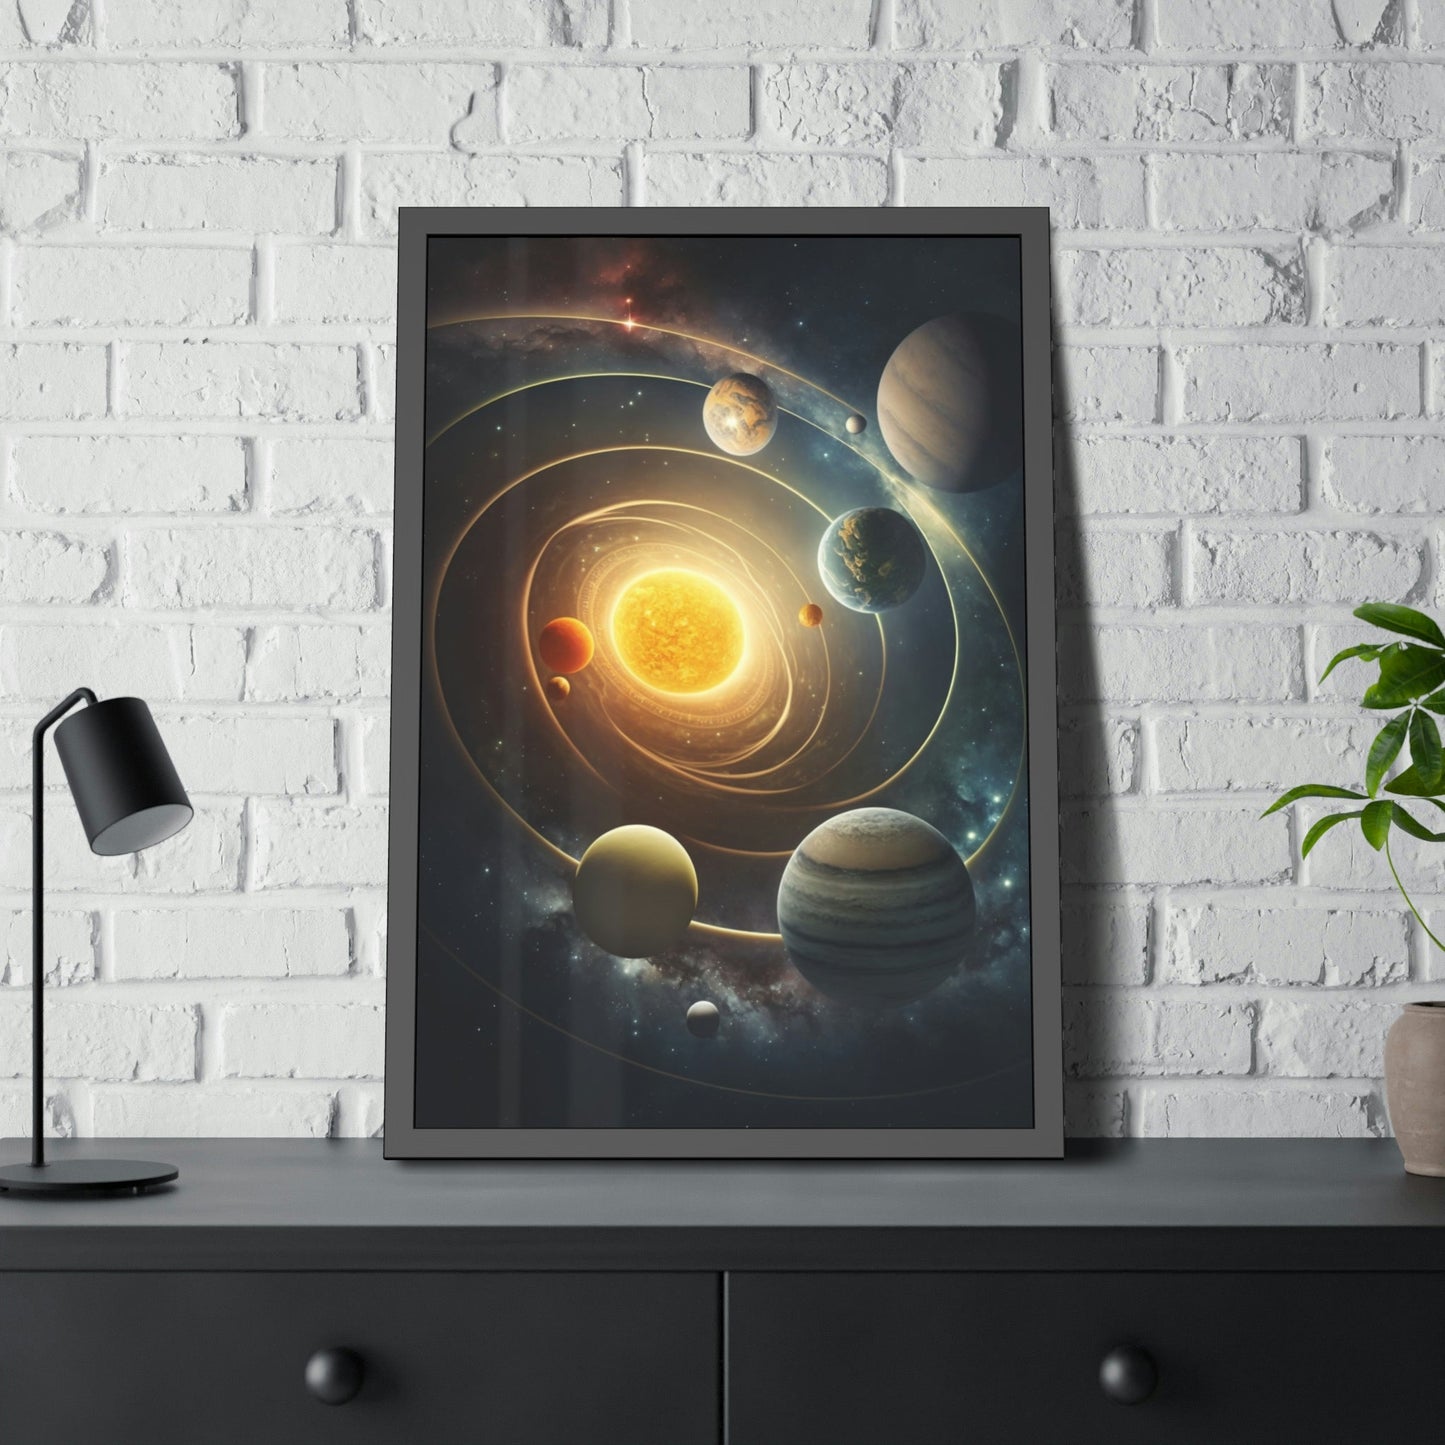 Discover the Cosmos: Framed Canvas Art of the Solar System for an Out-of-This-World Experience